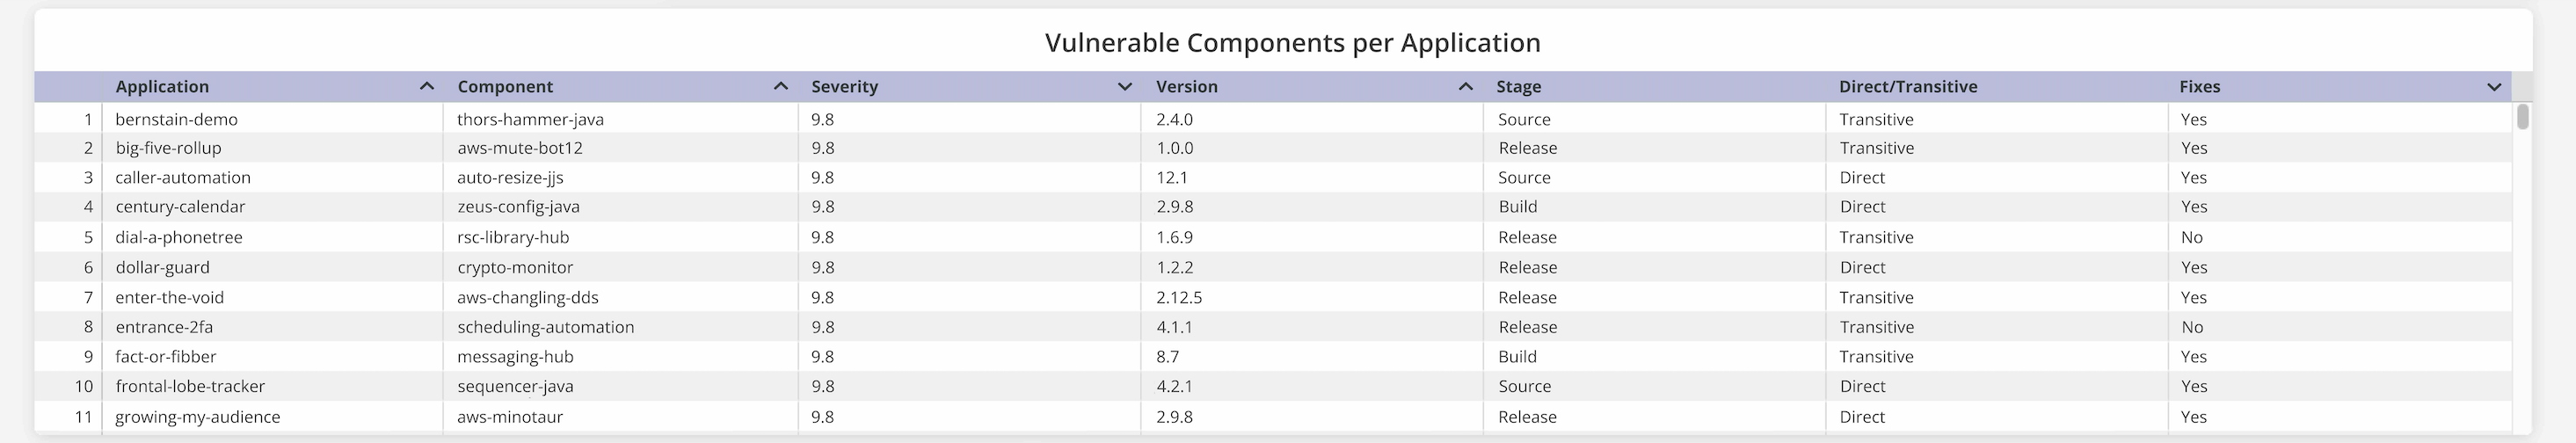 Vulnerable_Component_tables.png